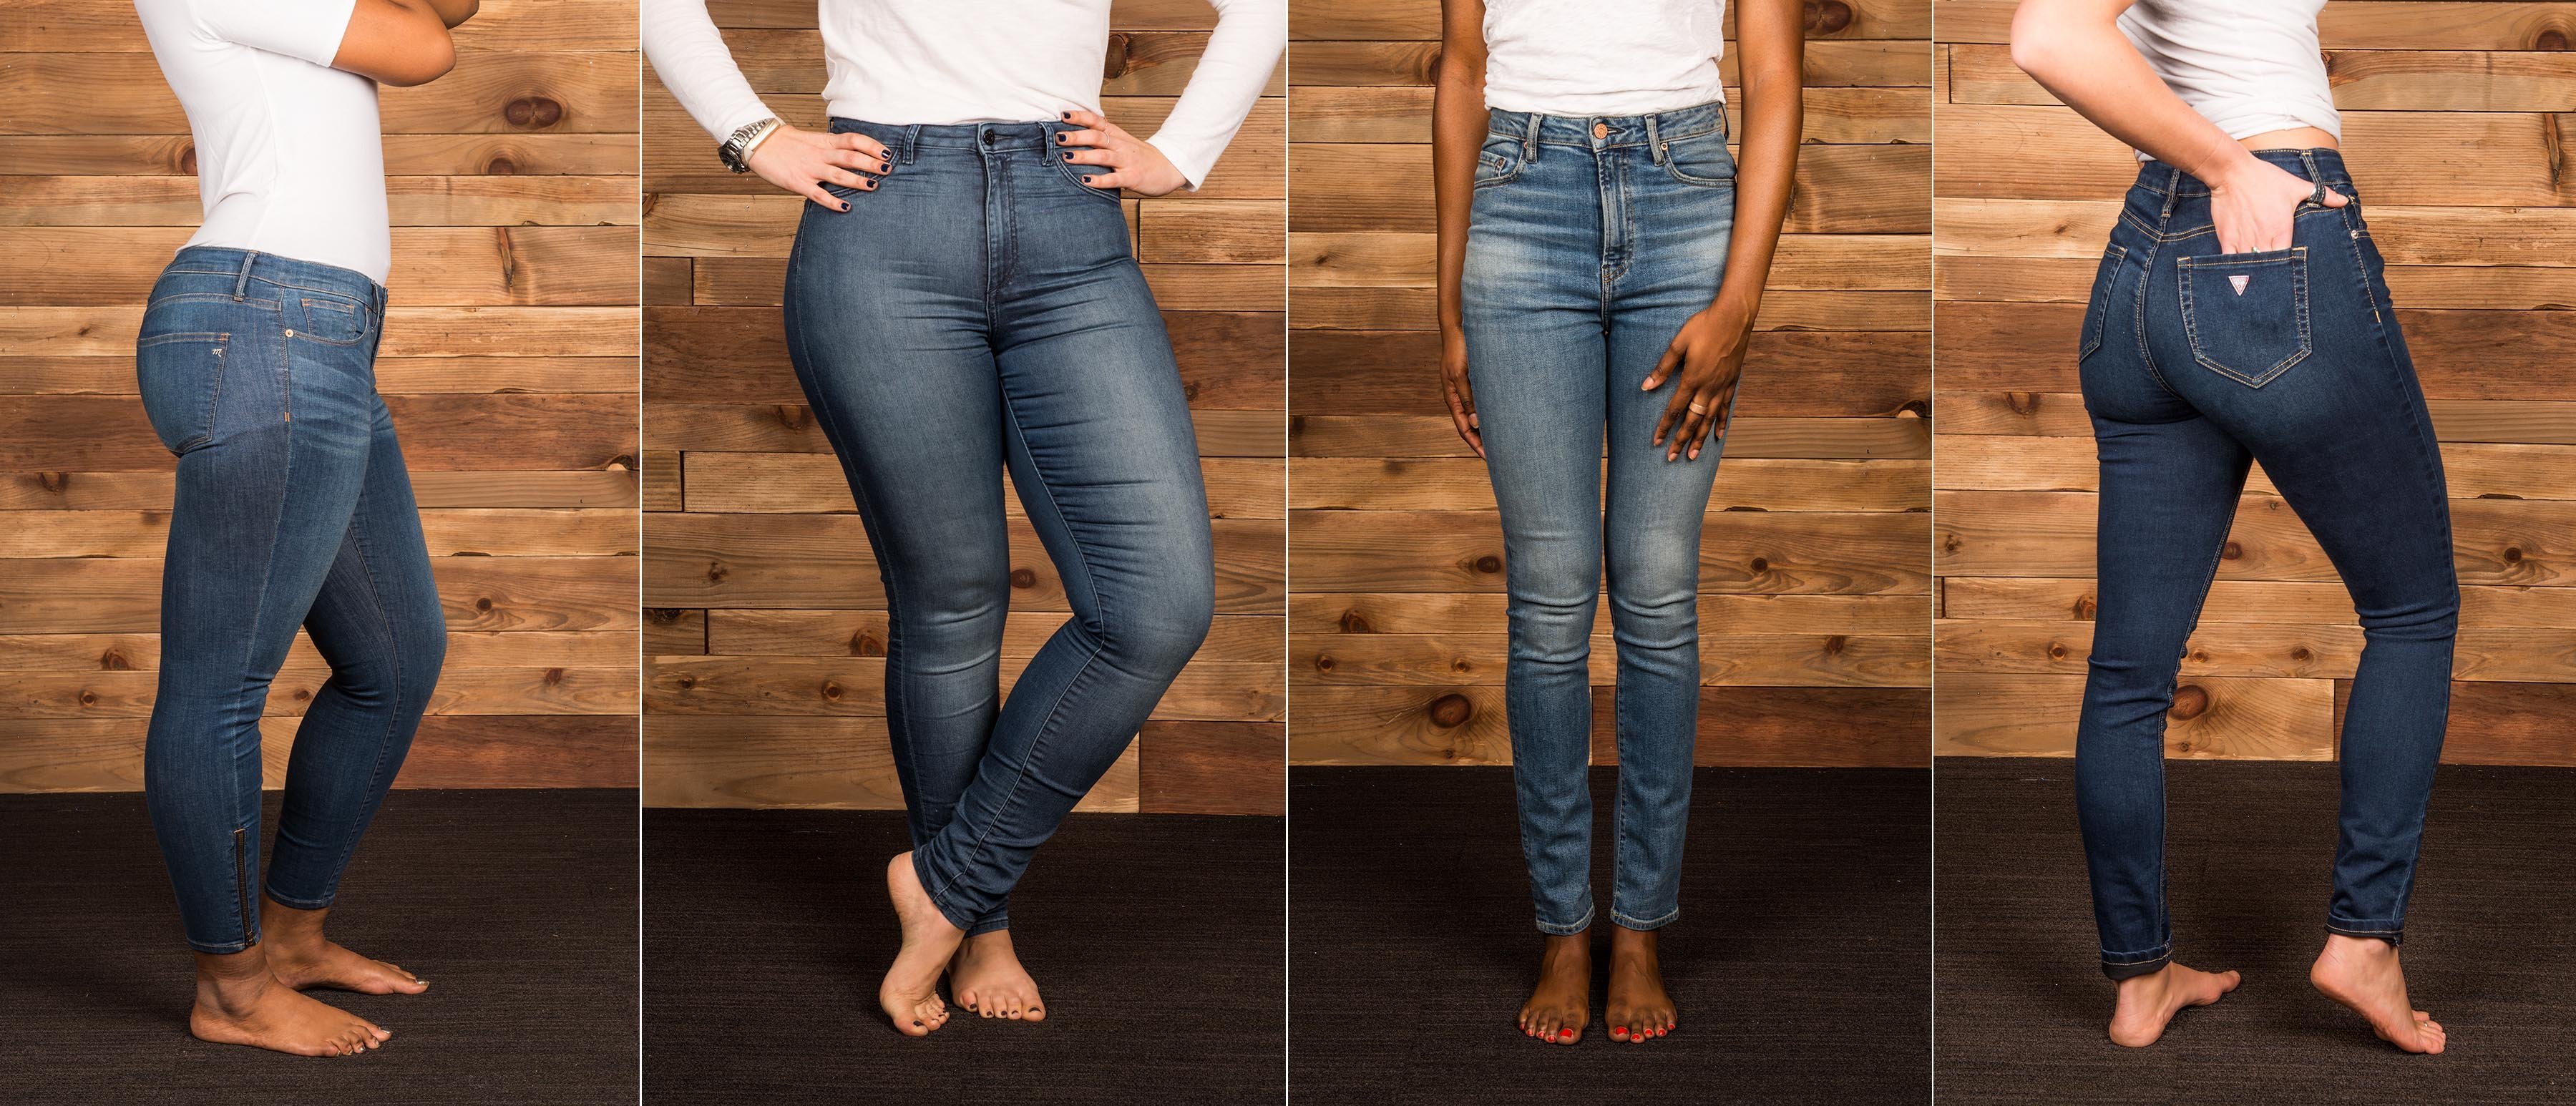 jeans that make your stomach look flat